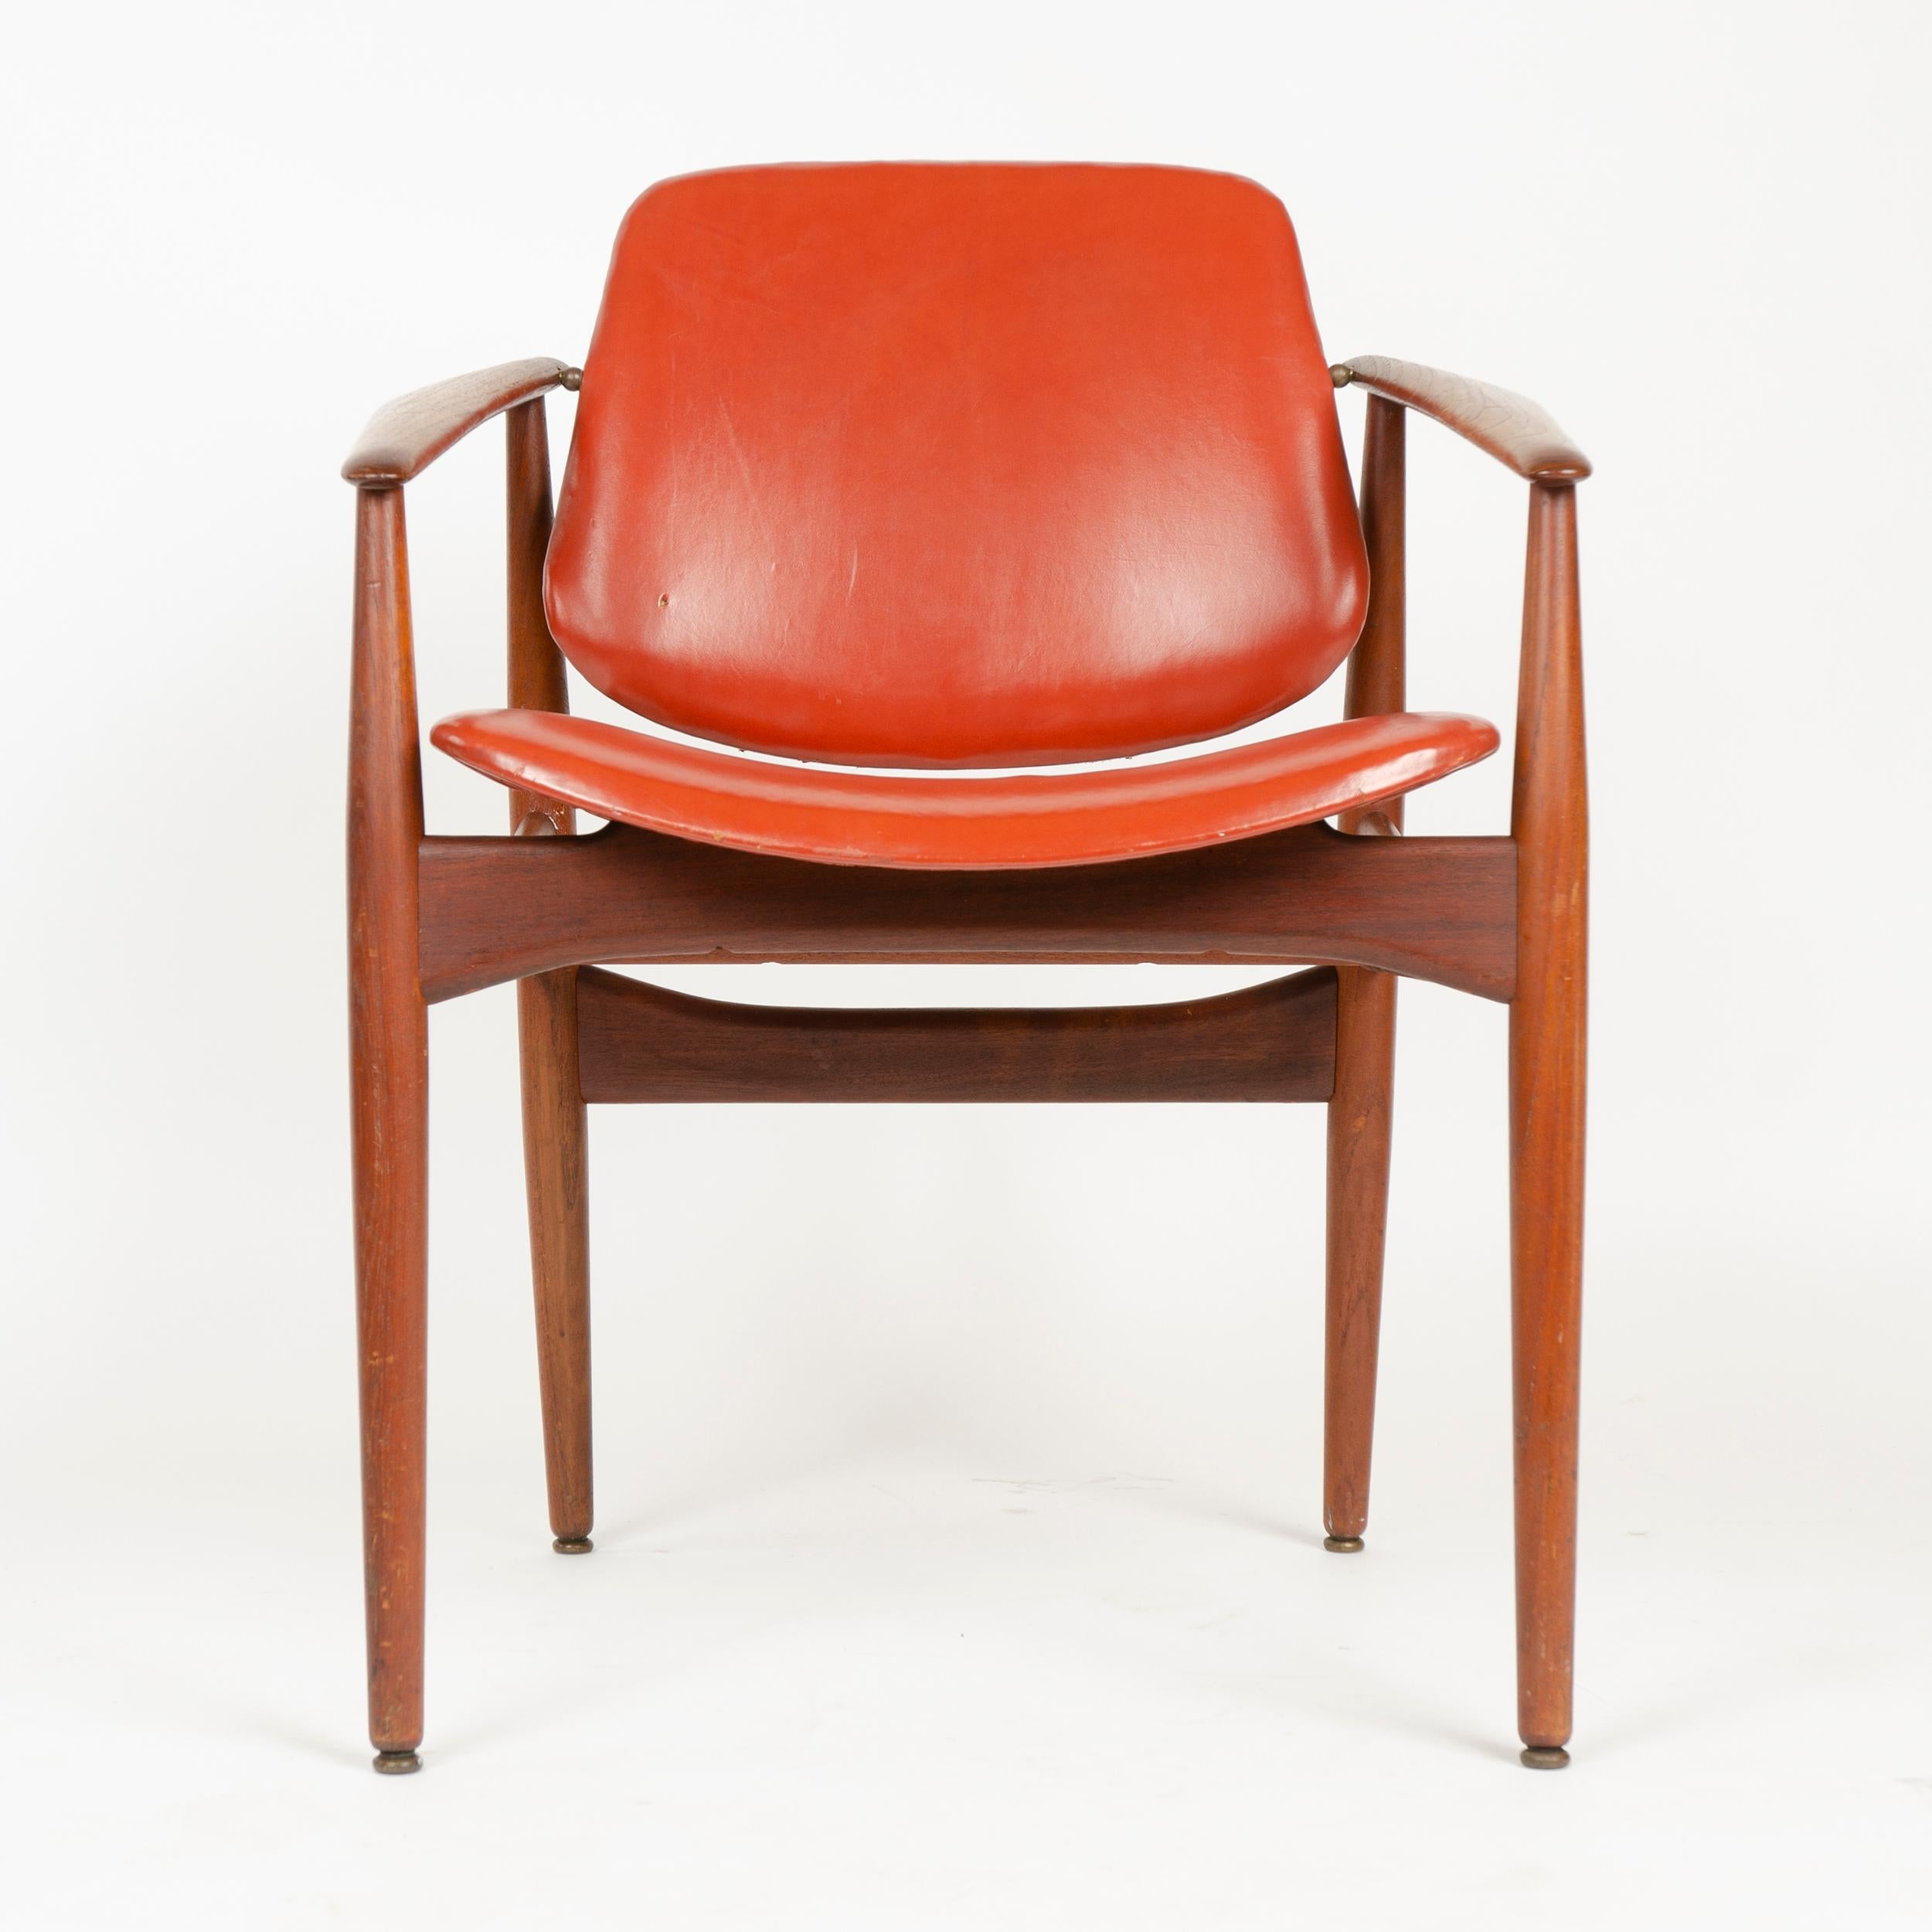 A dining chair having an exposed solid Bangkok teak frame supporting a wrapped molded seat and back, the back having a unique brass-hinged pivoting adjustment.